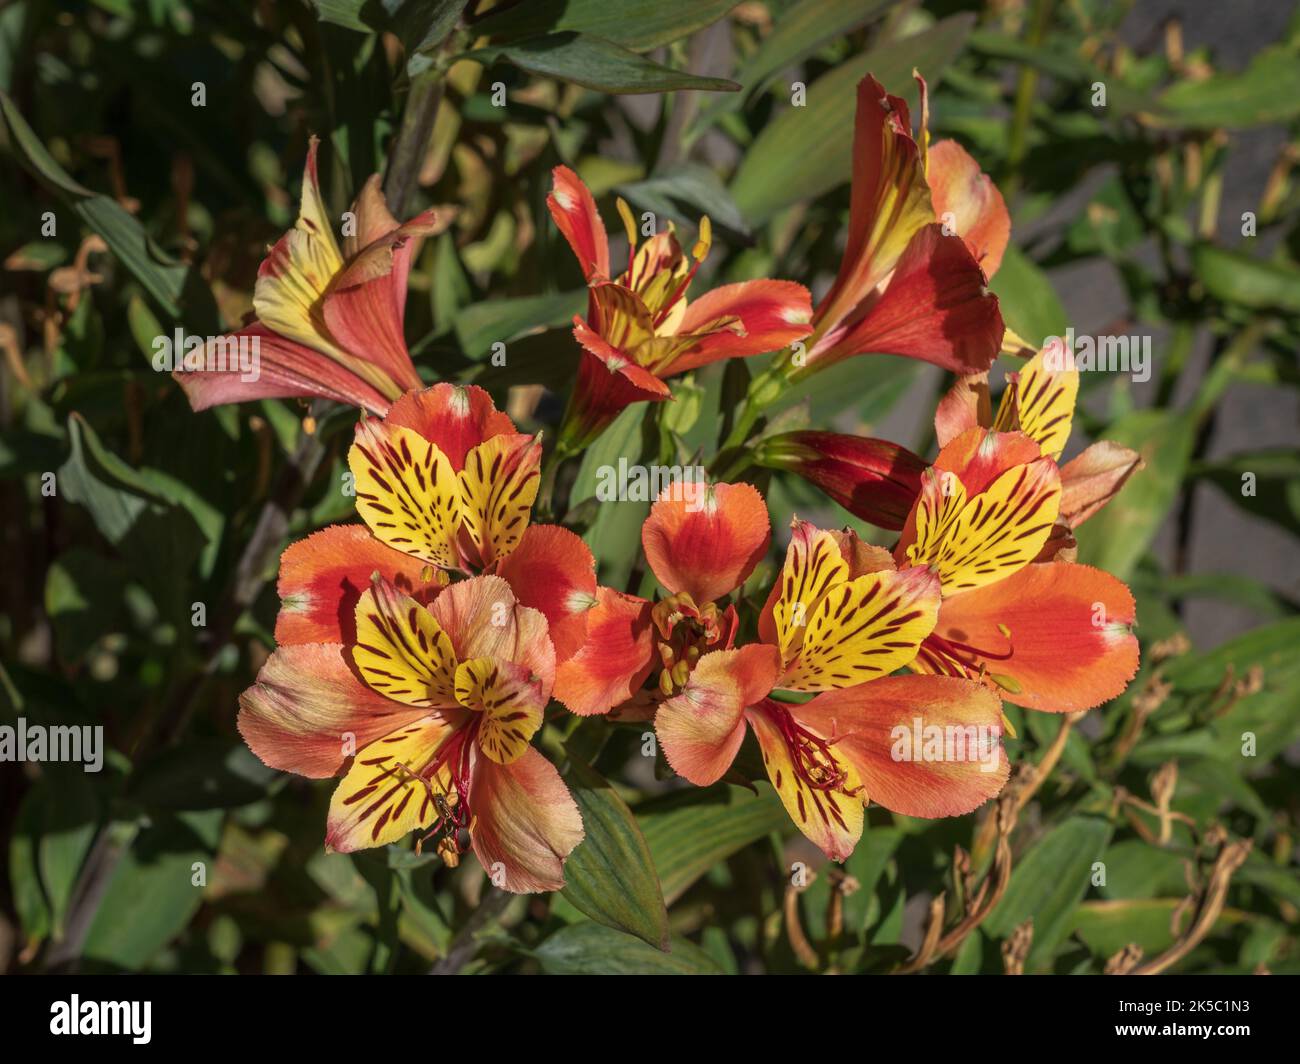 Closeup view of bright and colorful orange and yellow flowers of alstroemeria aka Peruvian lily or lily of the Incas blooming in garden outdoors Stock Photo